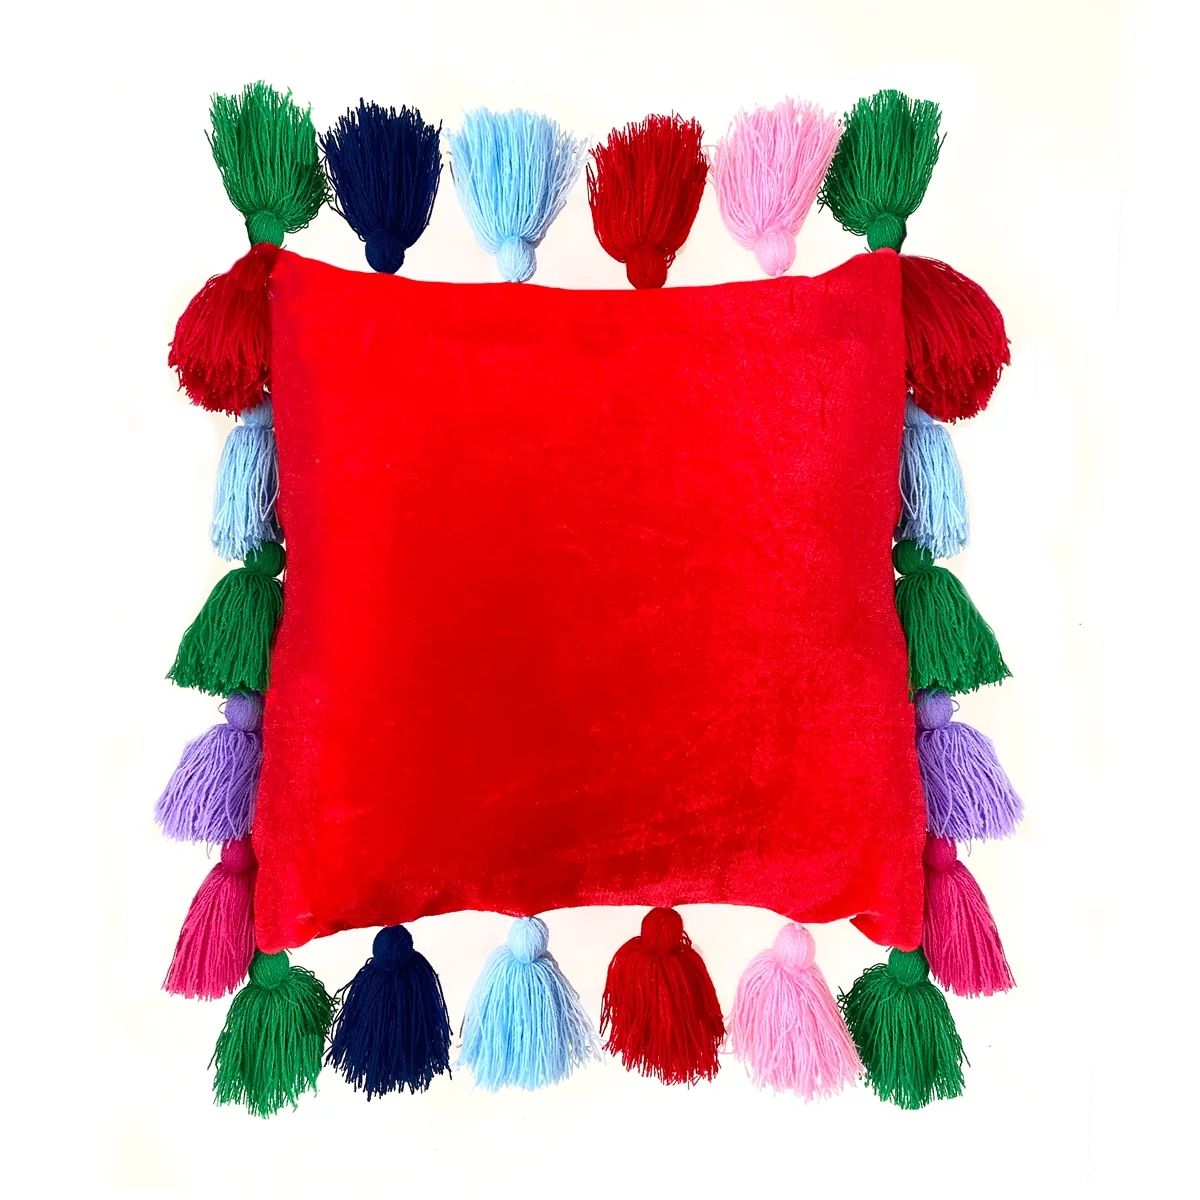 Packed Party Velvet Holiday Tassel-Pillow, Red 14"x14" Holiday Pillow with Multi-Color Tassels - ... | Walmart (US)